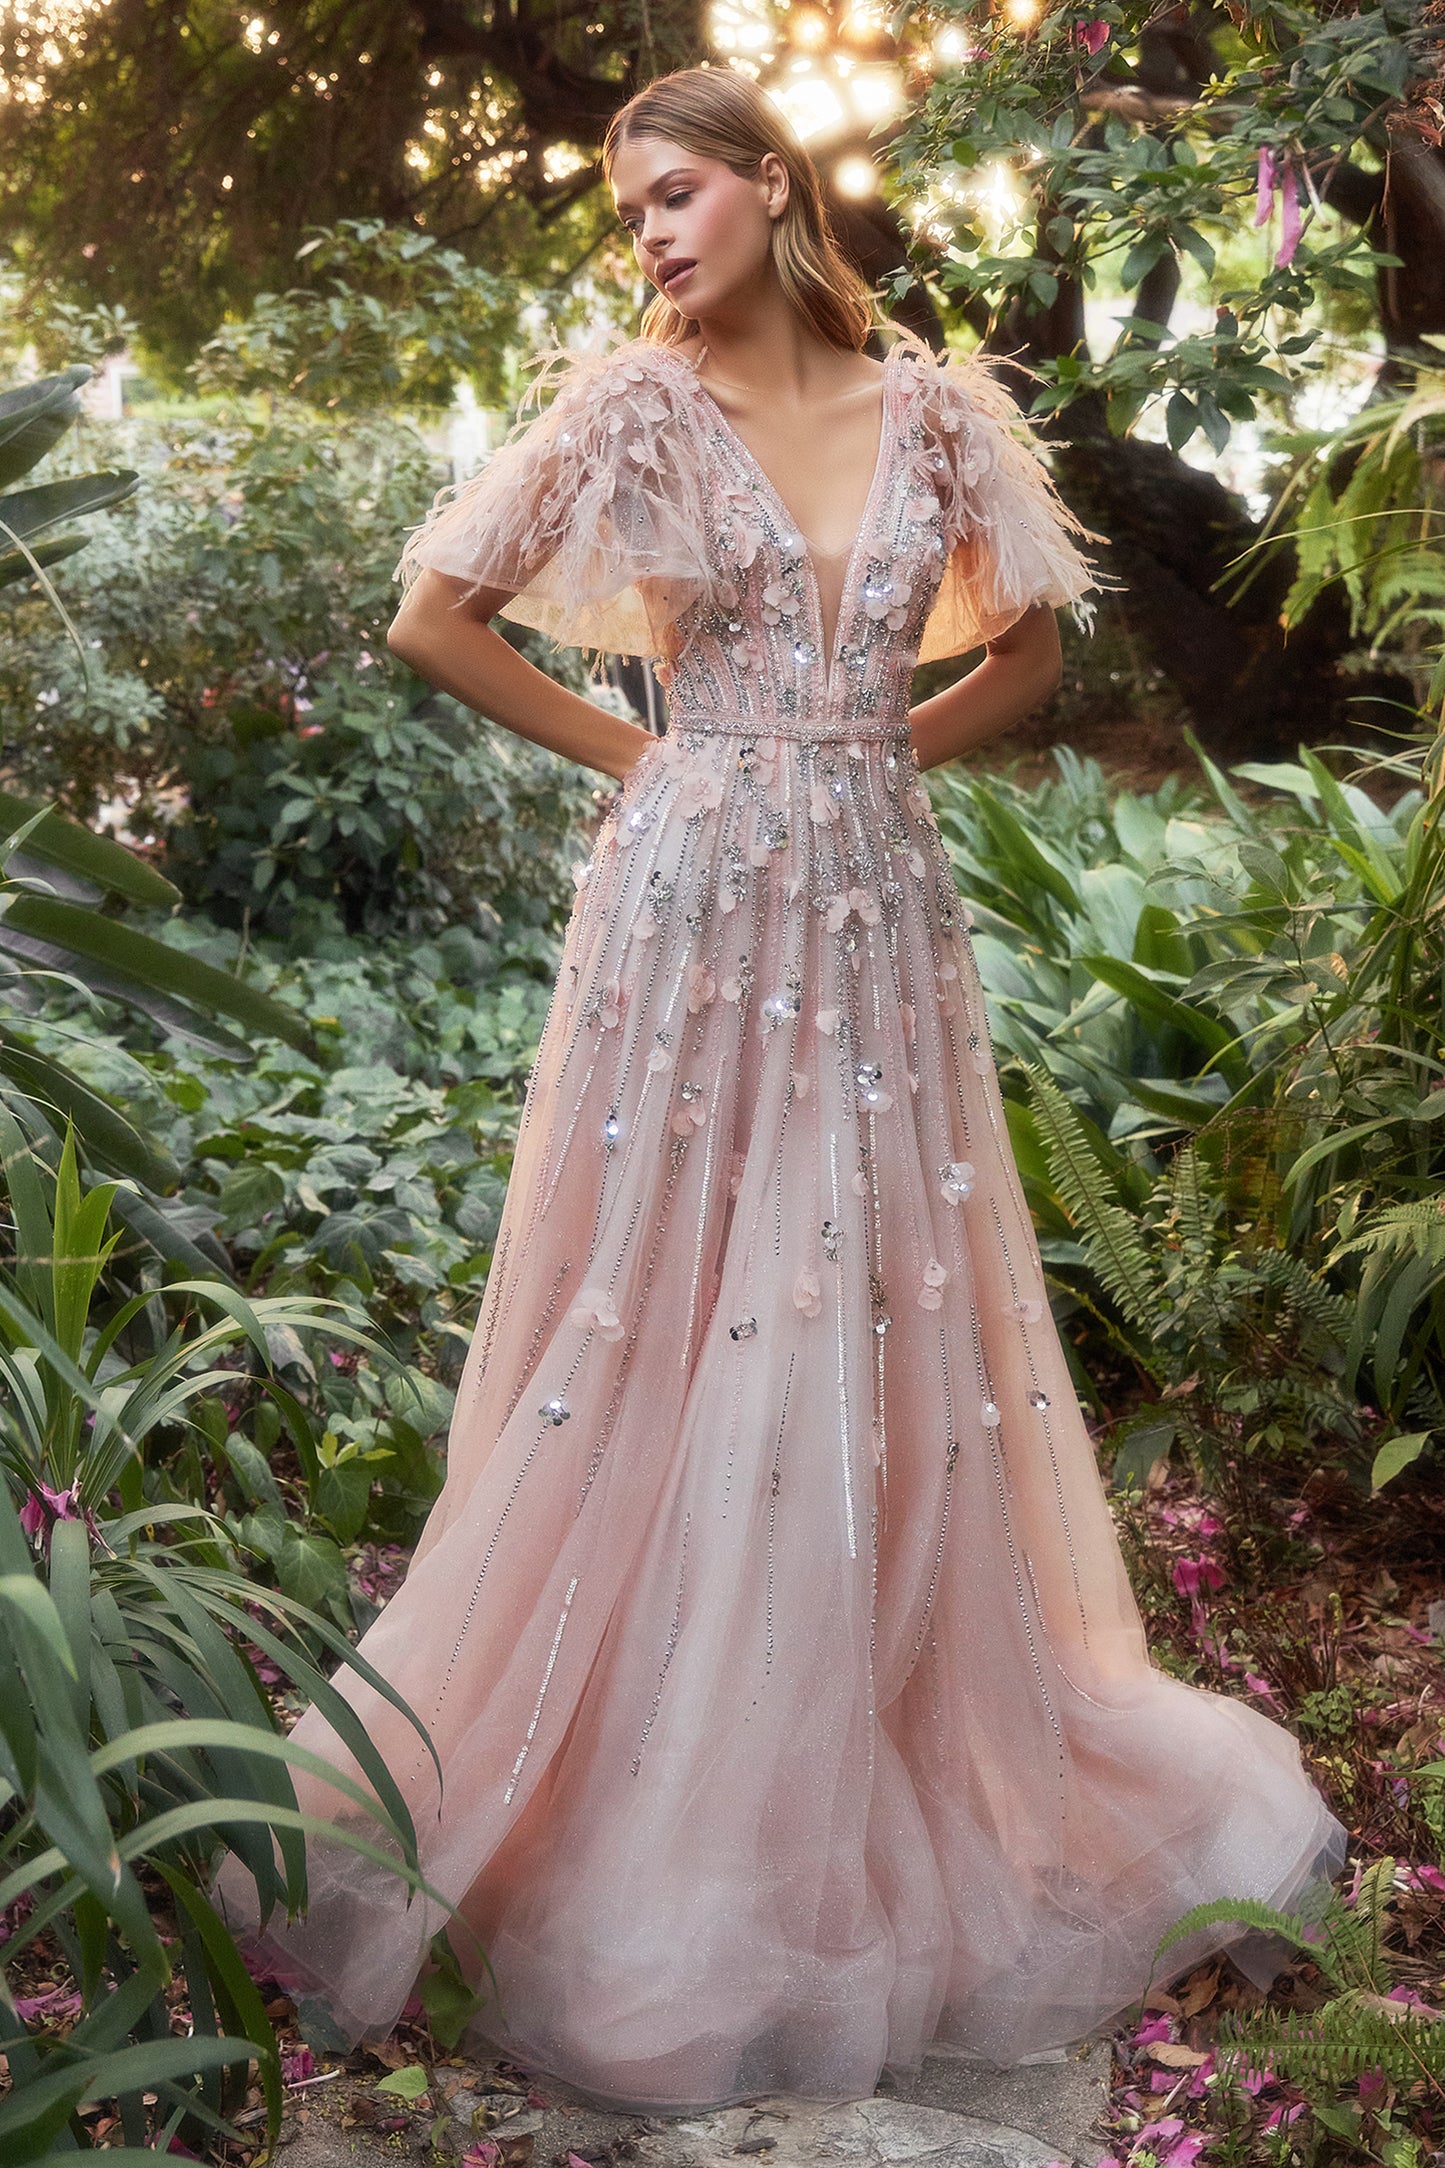 Step into your own dreamy fairytale with this breathtaking petal gown. This magnificent gown features the classic A-line shape of the tulle that's layered to perfection, beautifully adorned in elegant beading and petals to create a delicate, feminine outl